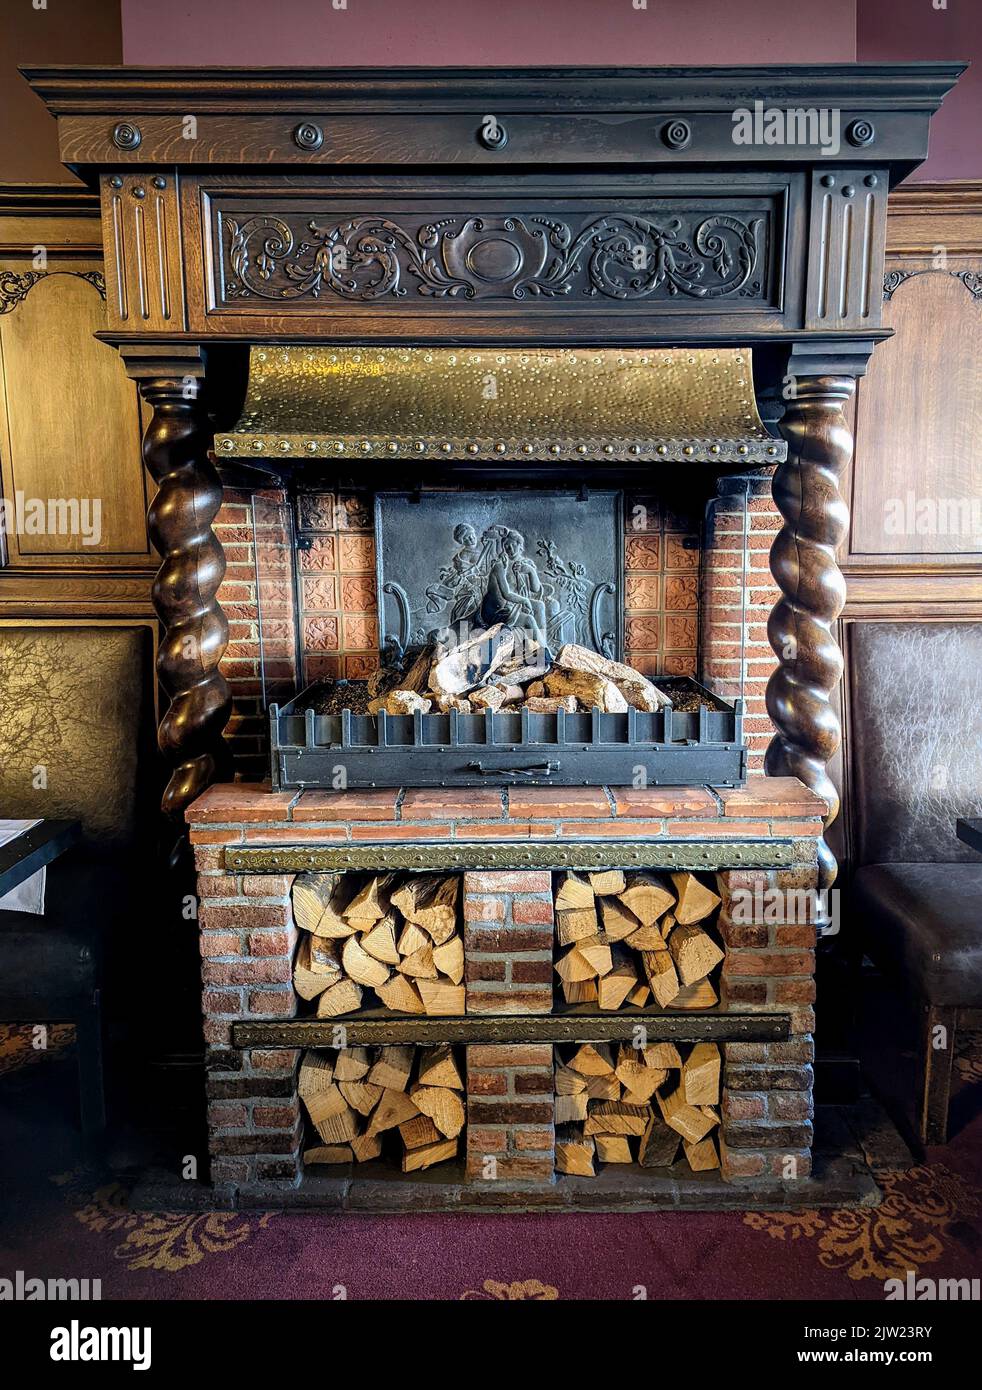 A vertical shot of an old fireplace with firewood in the shelf Stock Photo